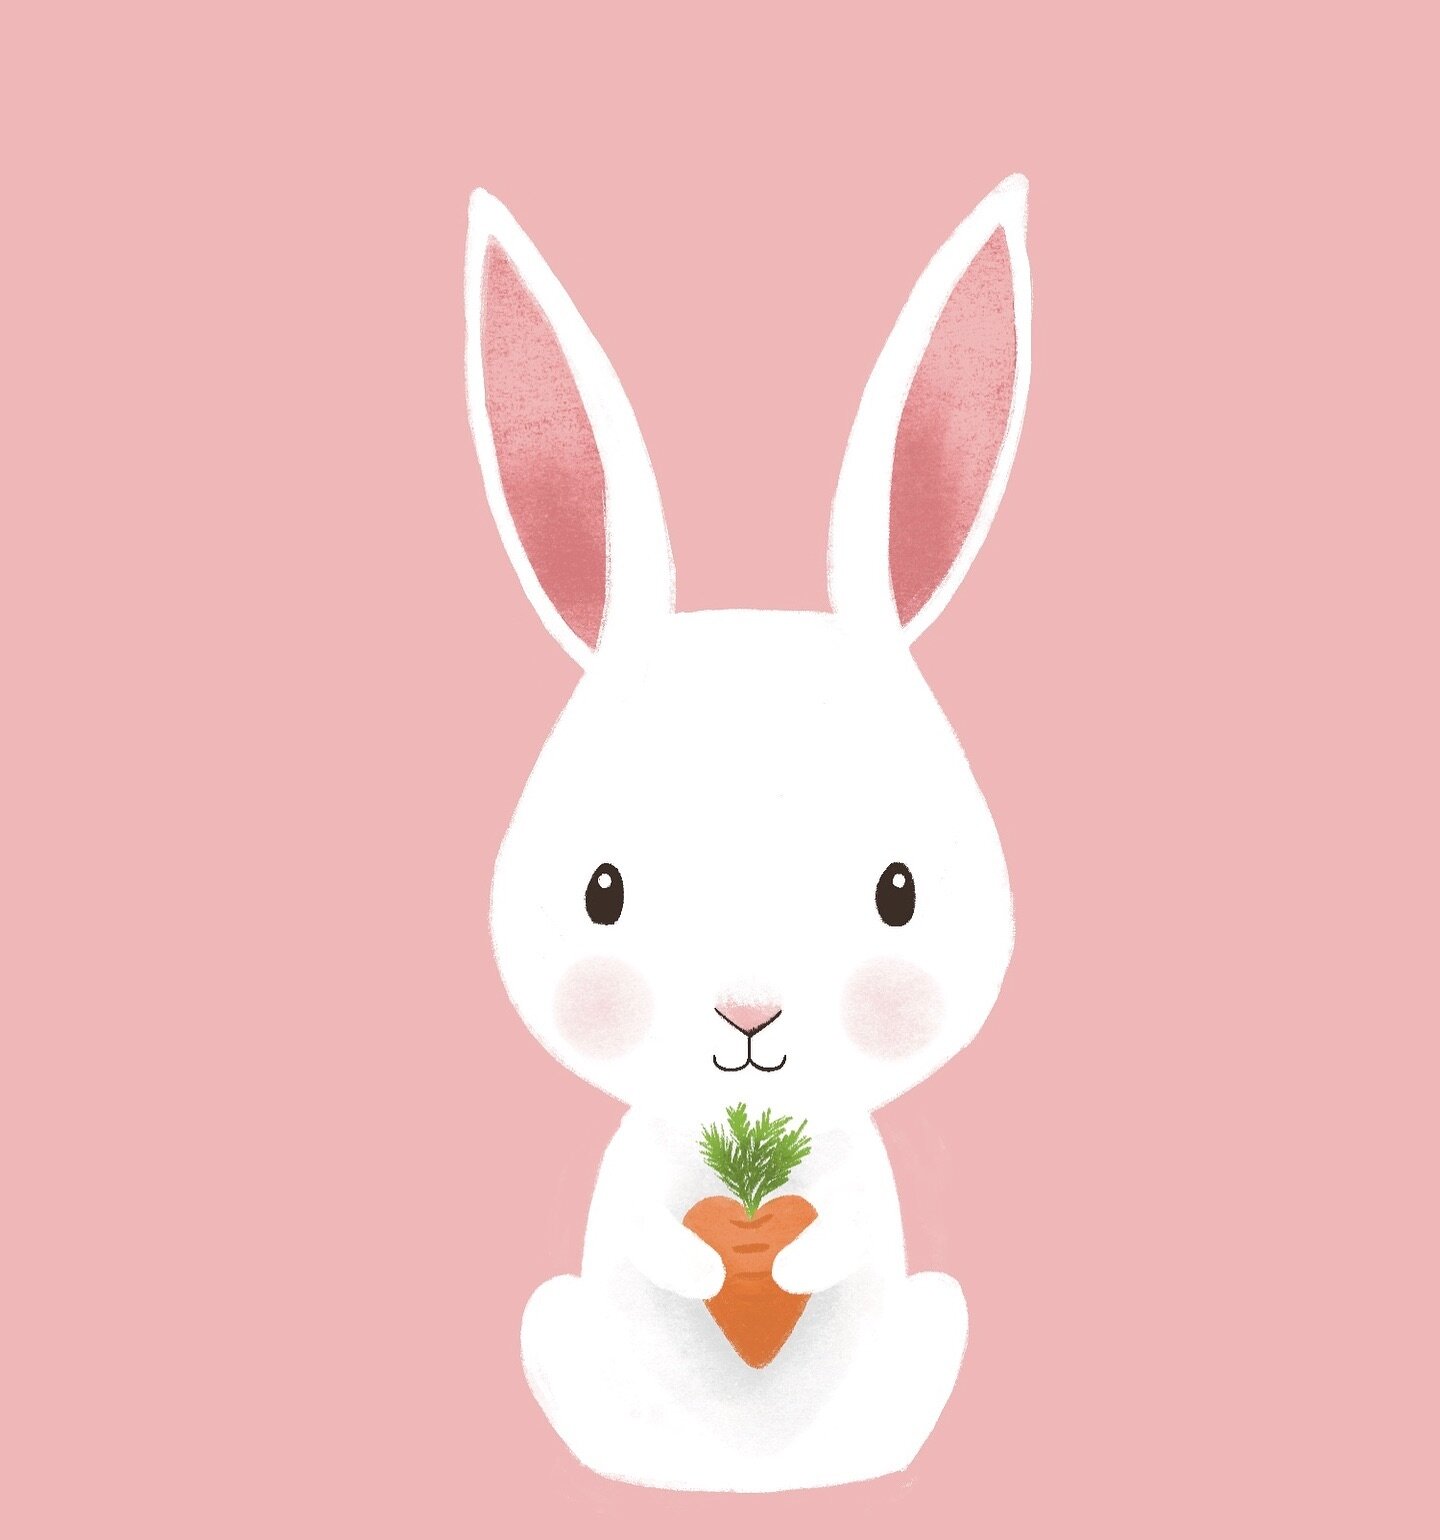 Hope you had a lovely Easter weekend. 💖 

Head down in the studio keeping that pencil busy. Hope you are working on something that lights up your creative soul 😊

✨
✨
✨

#cuteillustration  #illustratorlife #lisamgriffin #kidlitart  #whiterabbit #ar